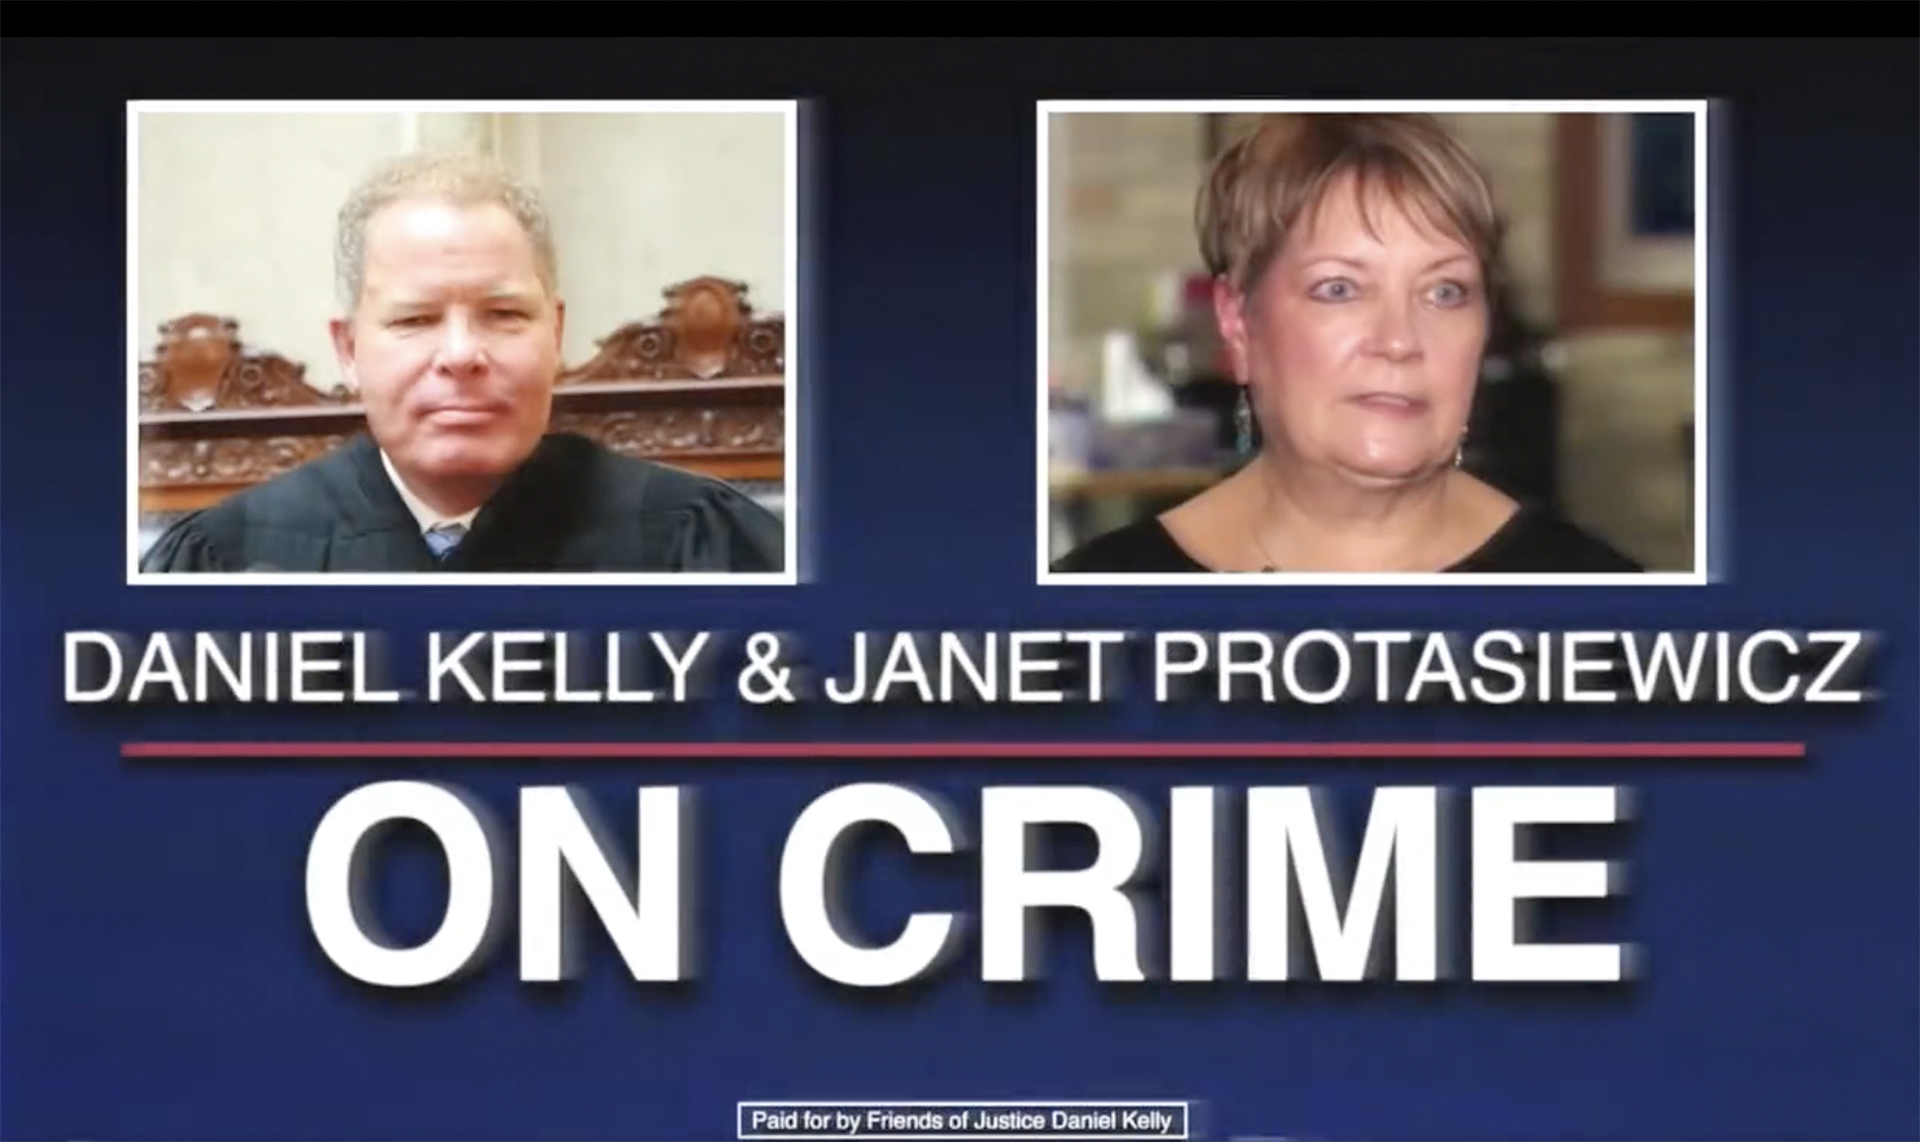 A still image from a video shows portraits of Daniel Kelly and Janet Protasiewicz along with the words "Daniel Kelly & Janet Protasiewicz" and "On Crime."